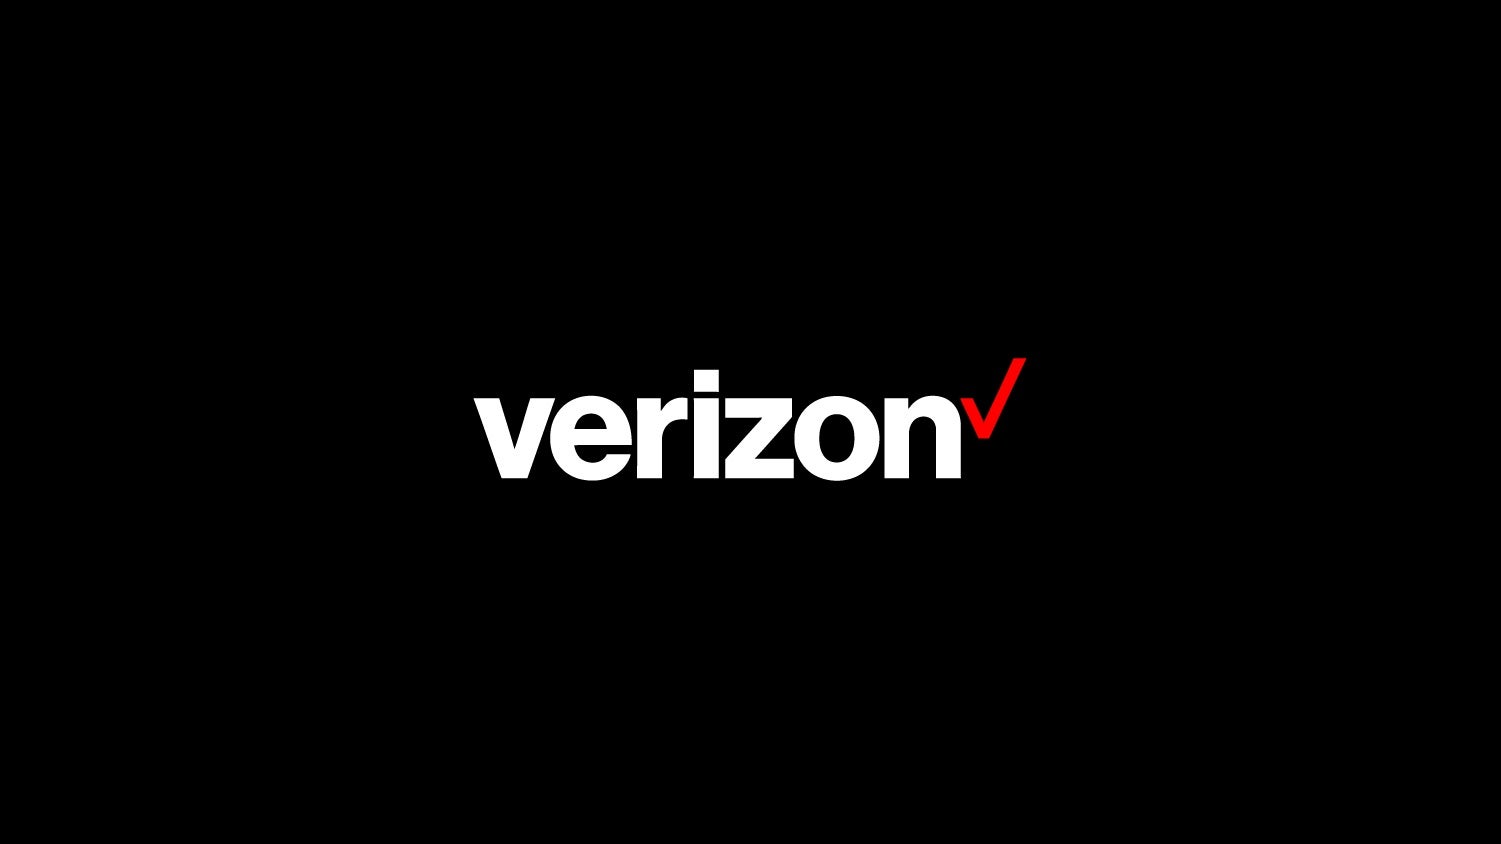 Verizon Stock Plunges As Customers Switch To AT&T, Telus: Here's What's Happening